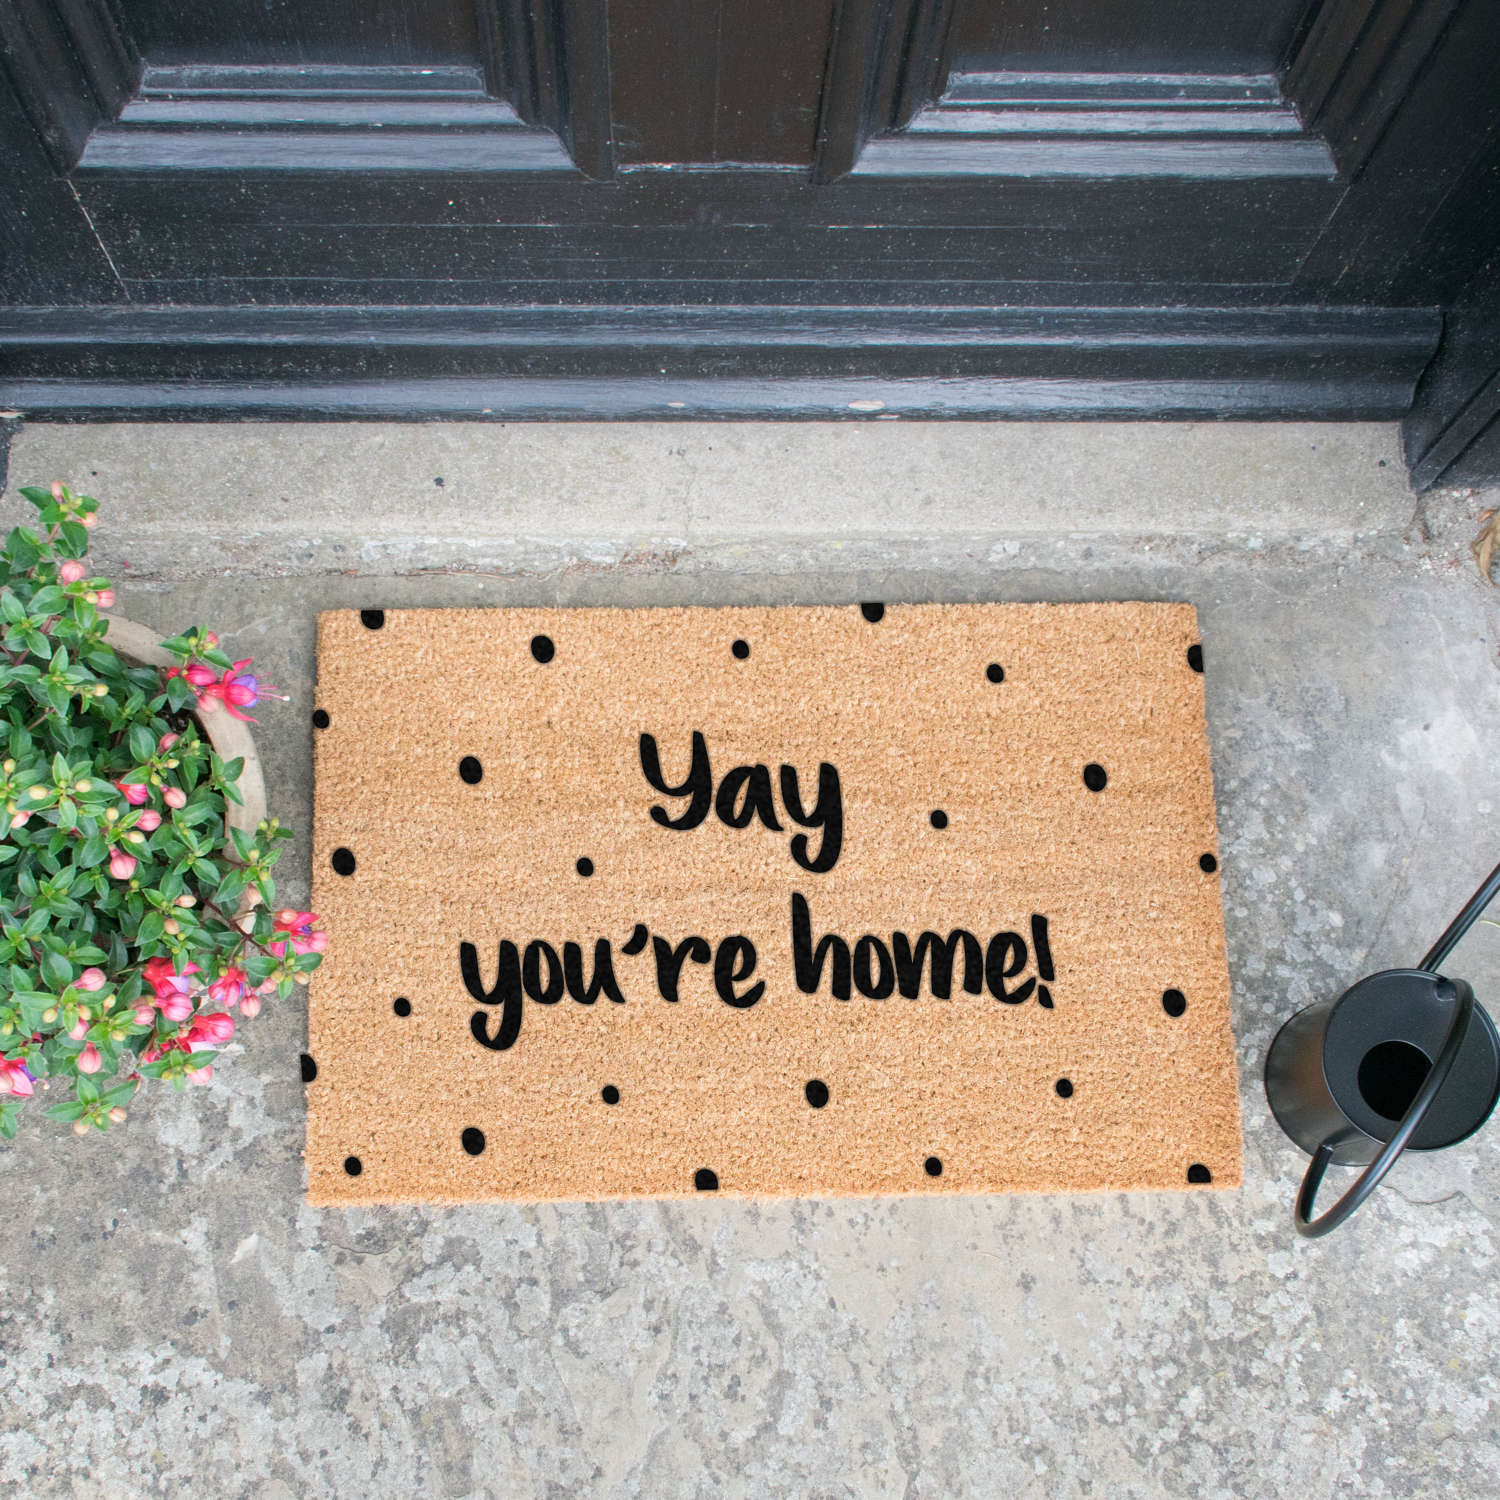 Yay you're home design standard size doormat